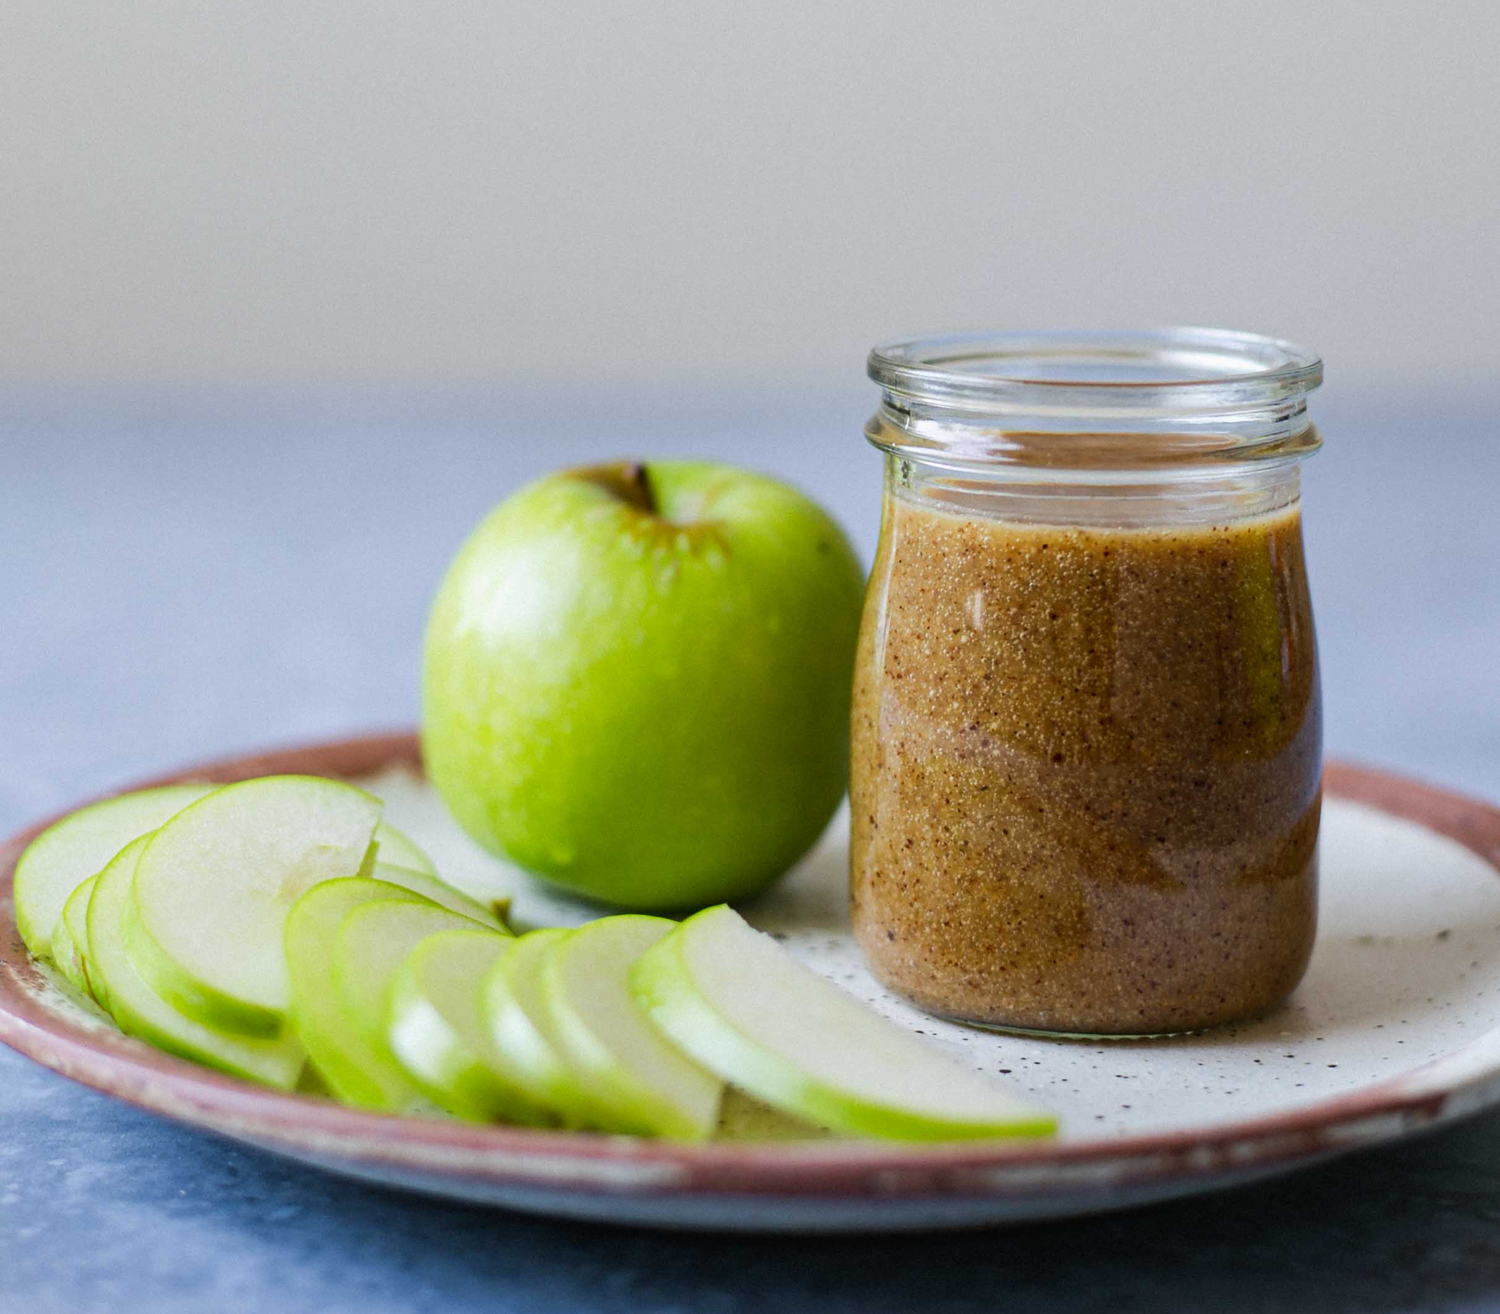 A close up picture of a plate with an apple, sliced apple pieces and jar of miso on it.